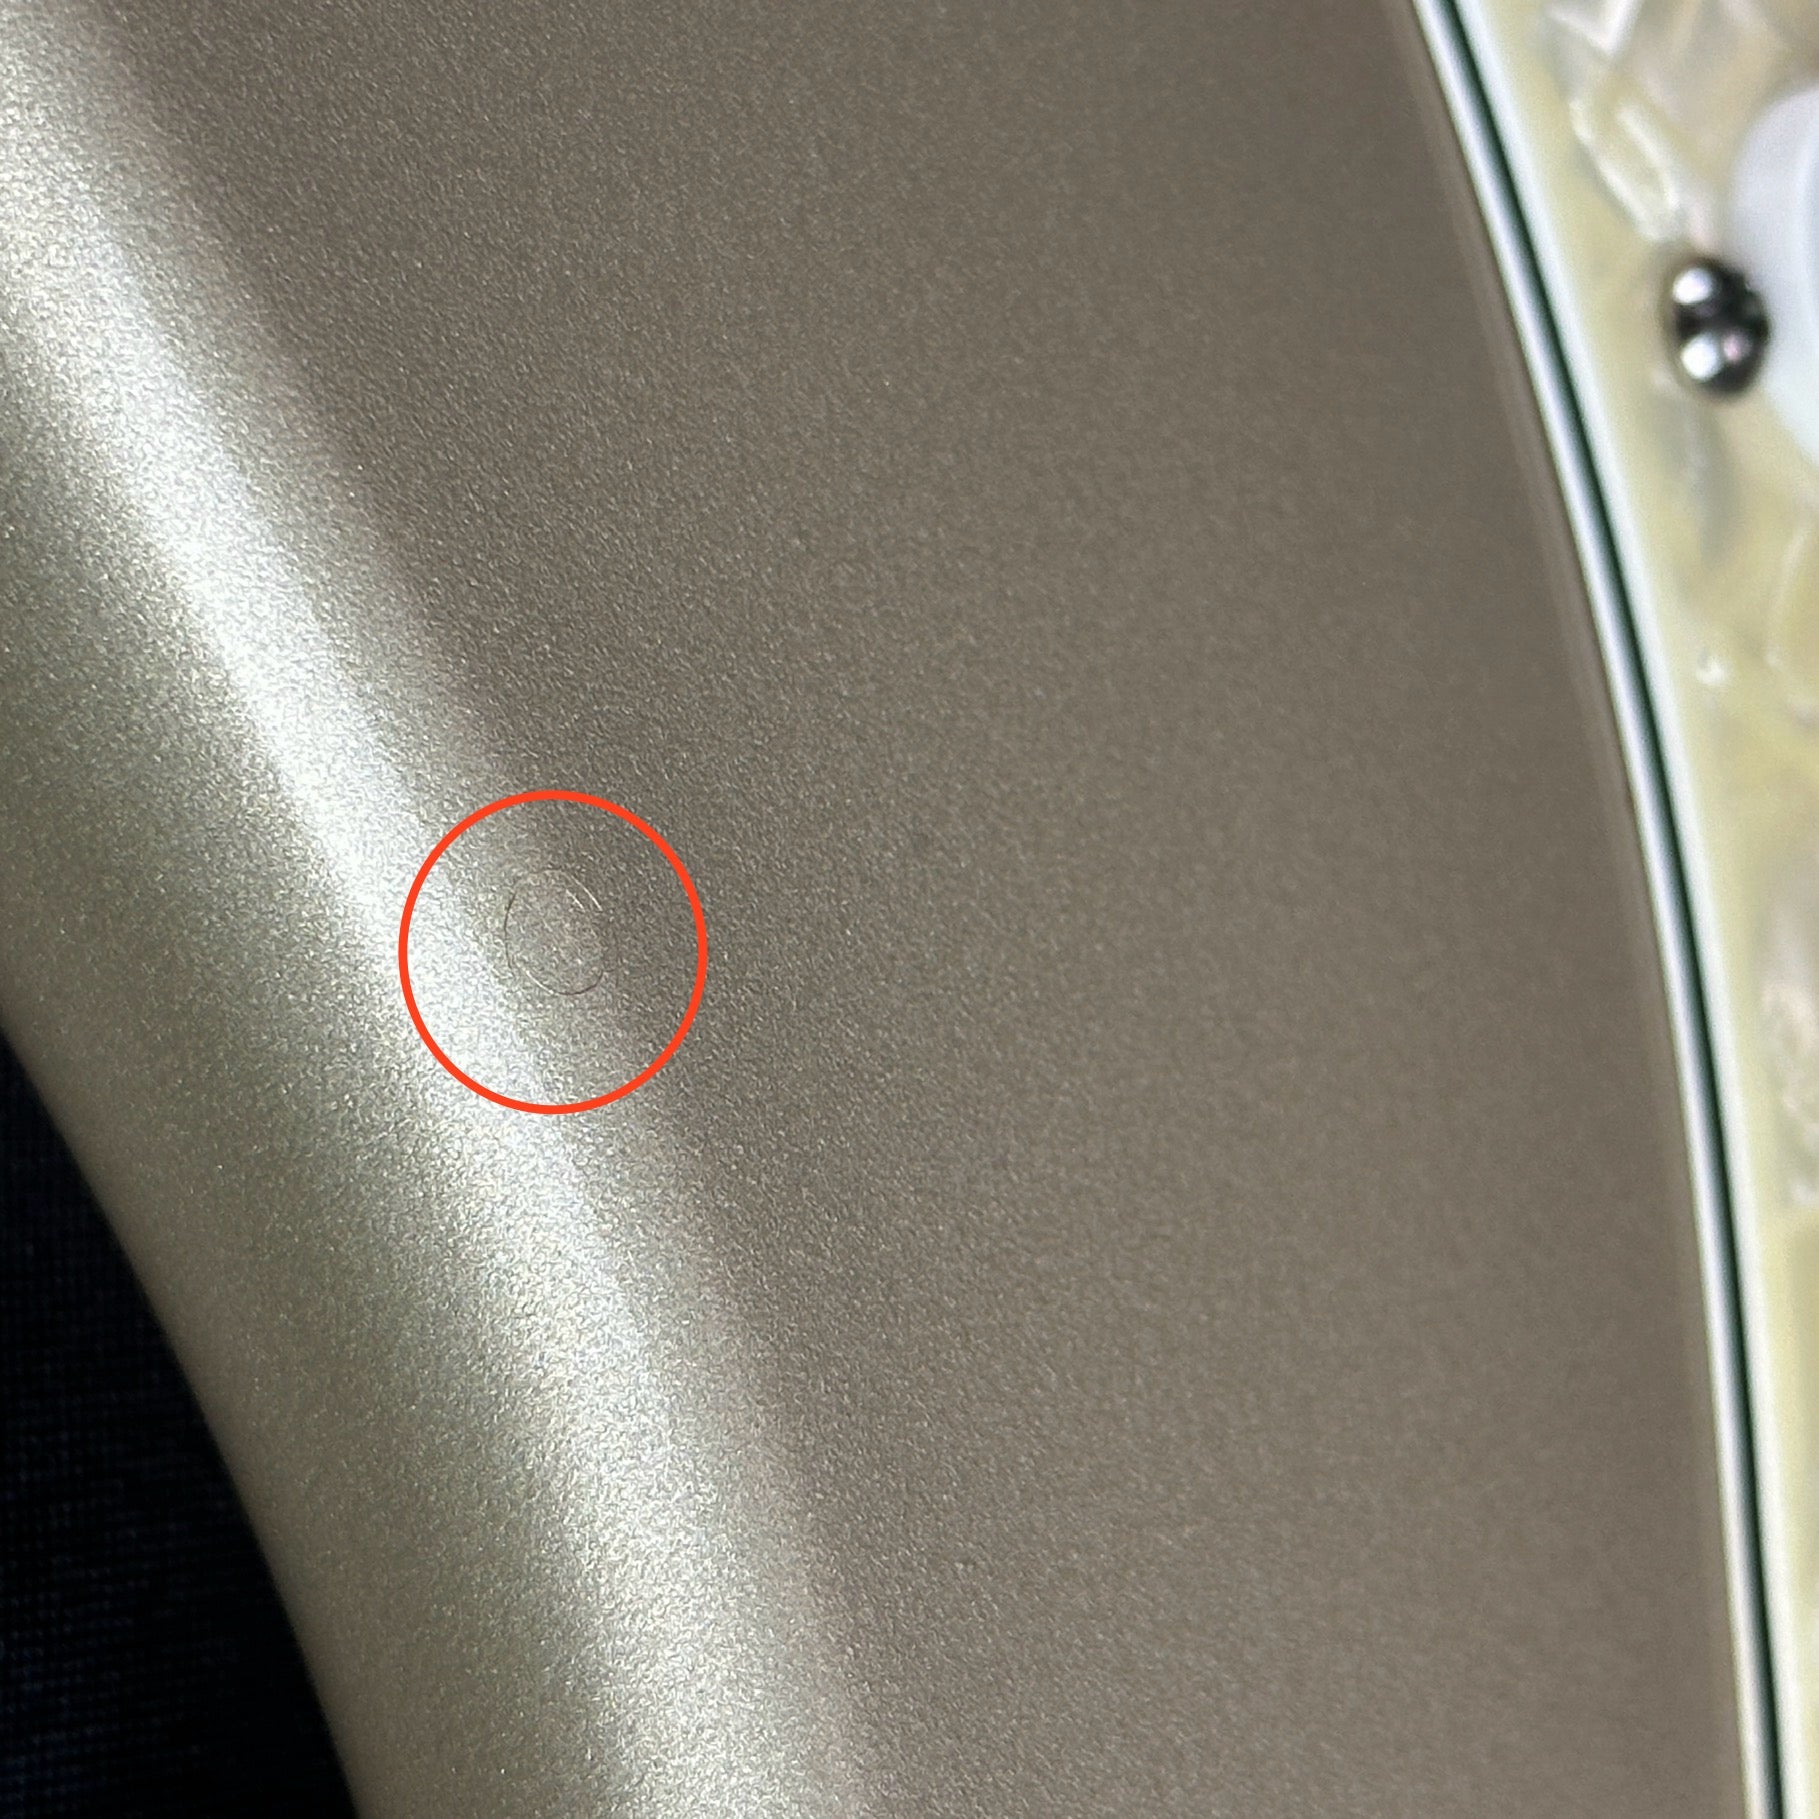 Small ding on side of Used 1997 Fender Lone Star Strat HSS Shoreline Gold.